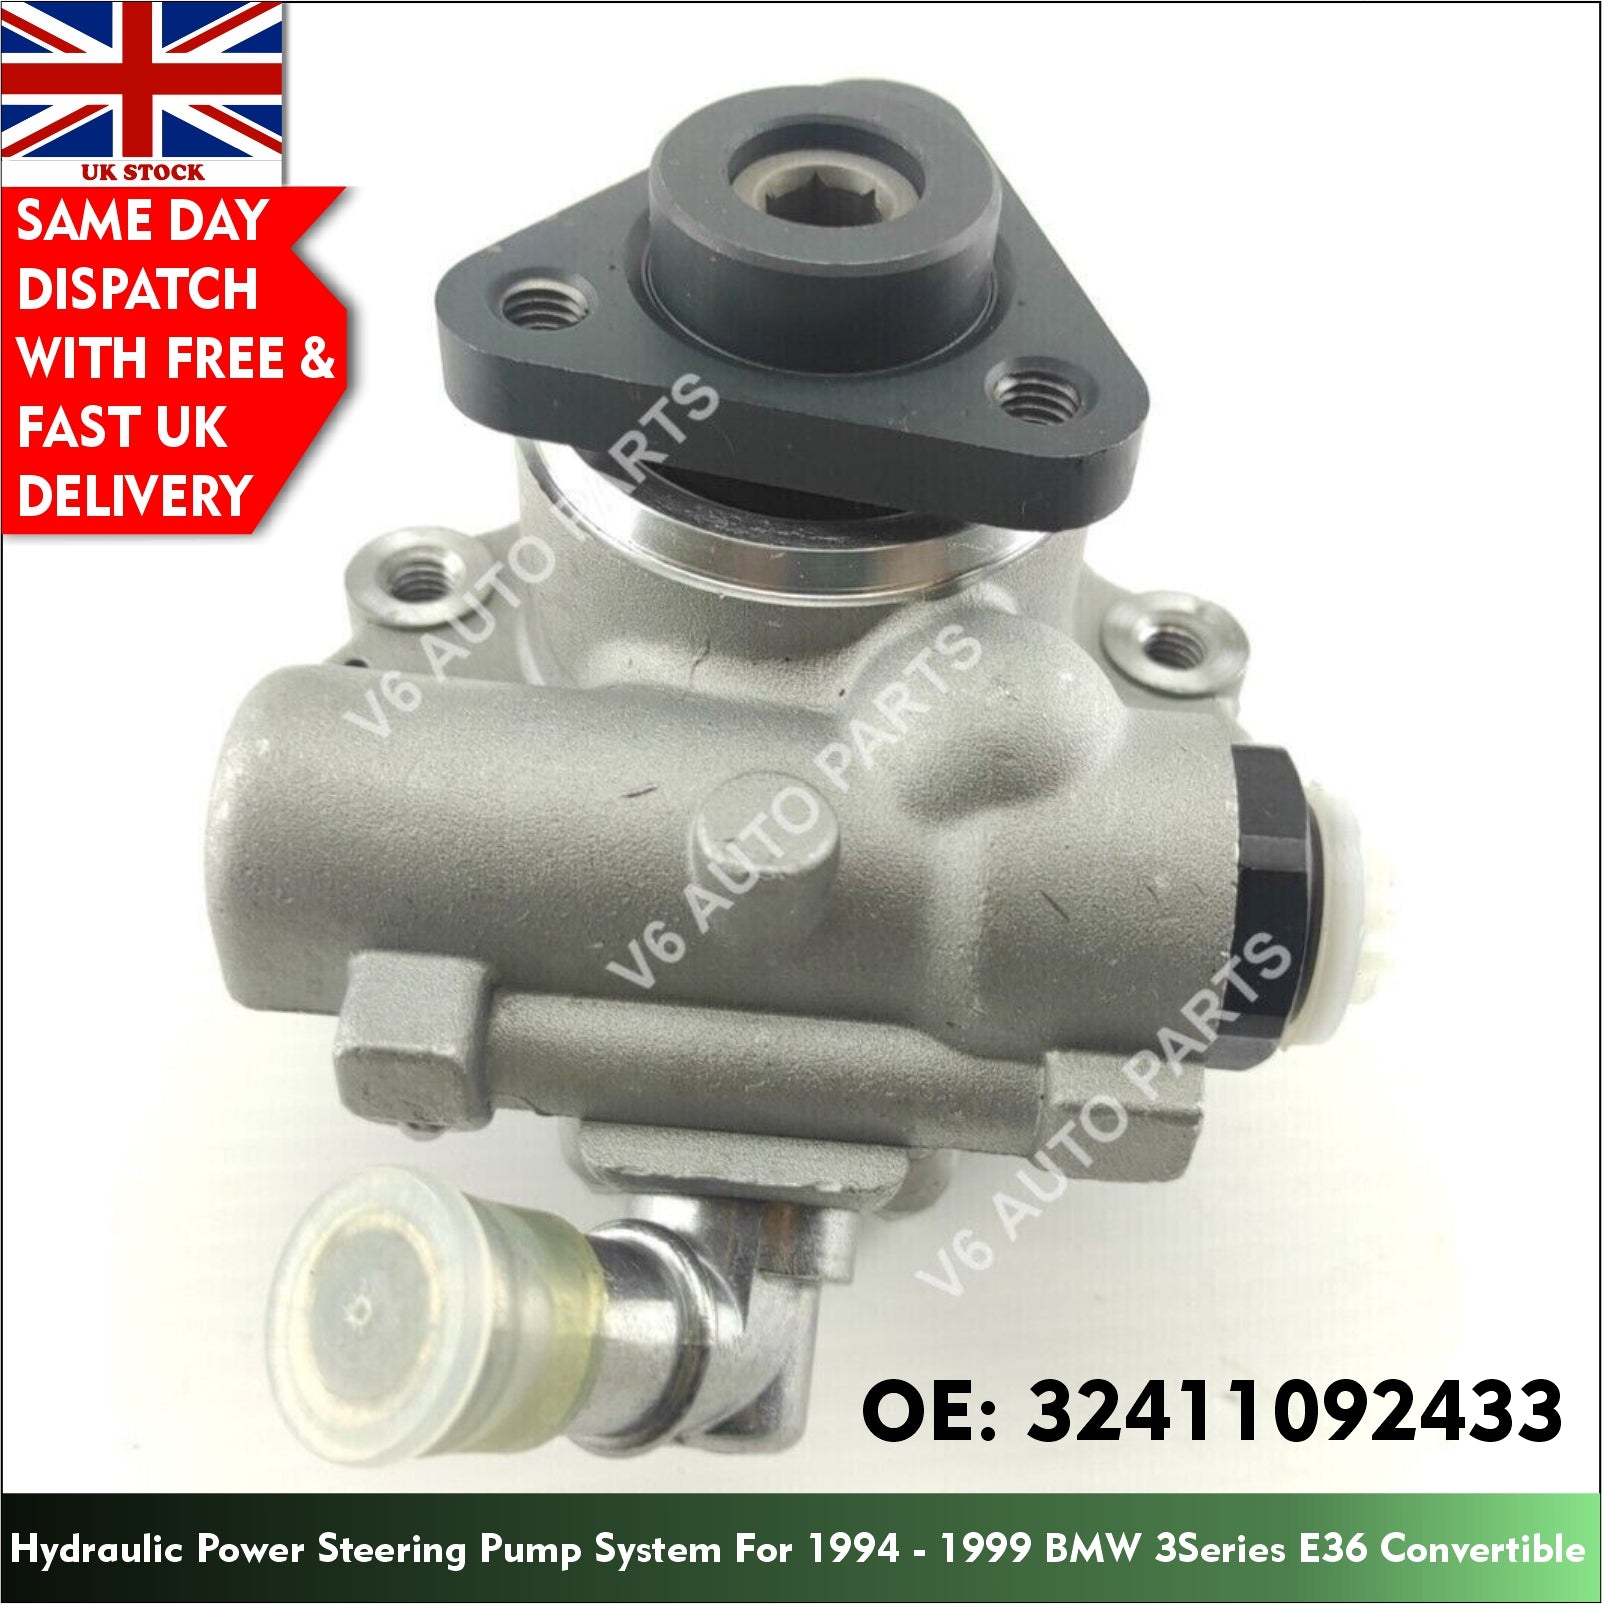 For 1994 To 1999 BMW 3 Series E36 Cabriolet Power Steering System Hydraulic Pump